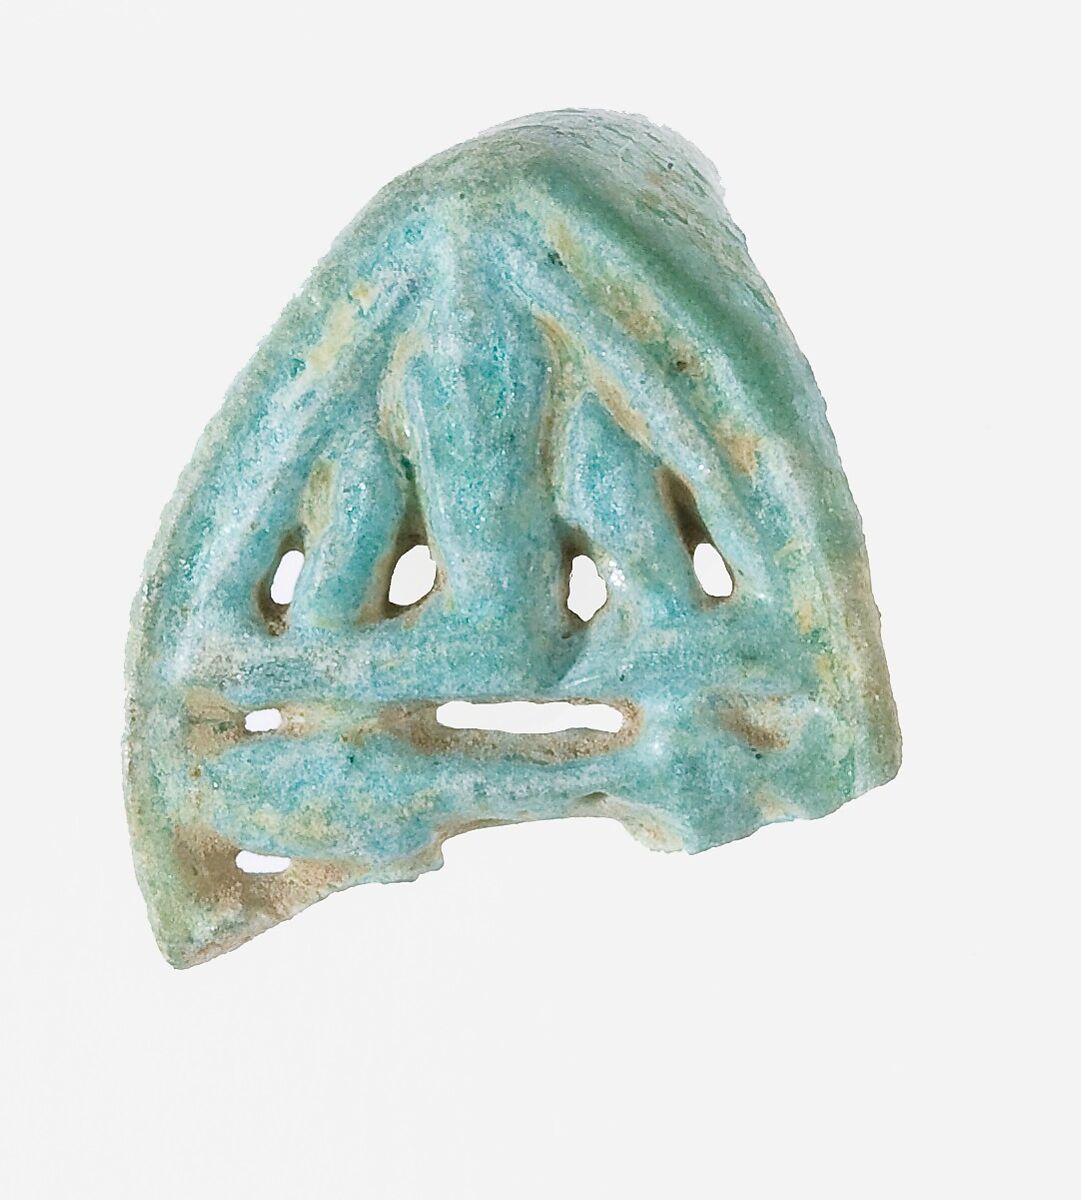 Ring Fragment, Faience, Blue, green 